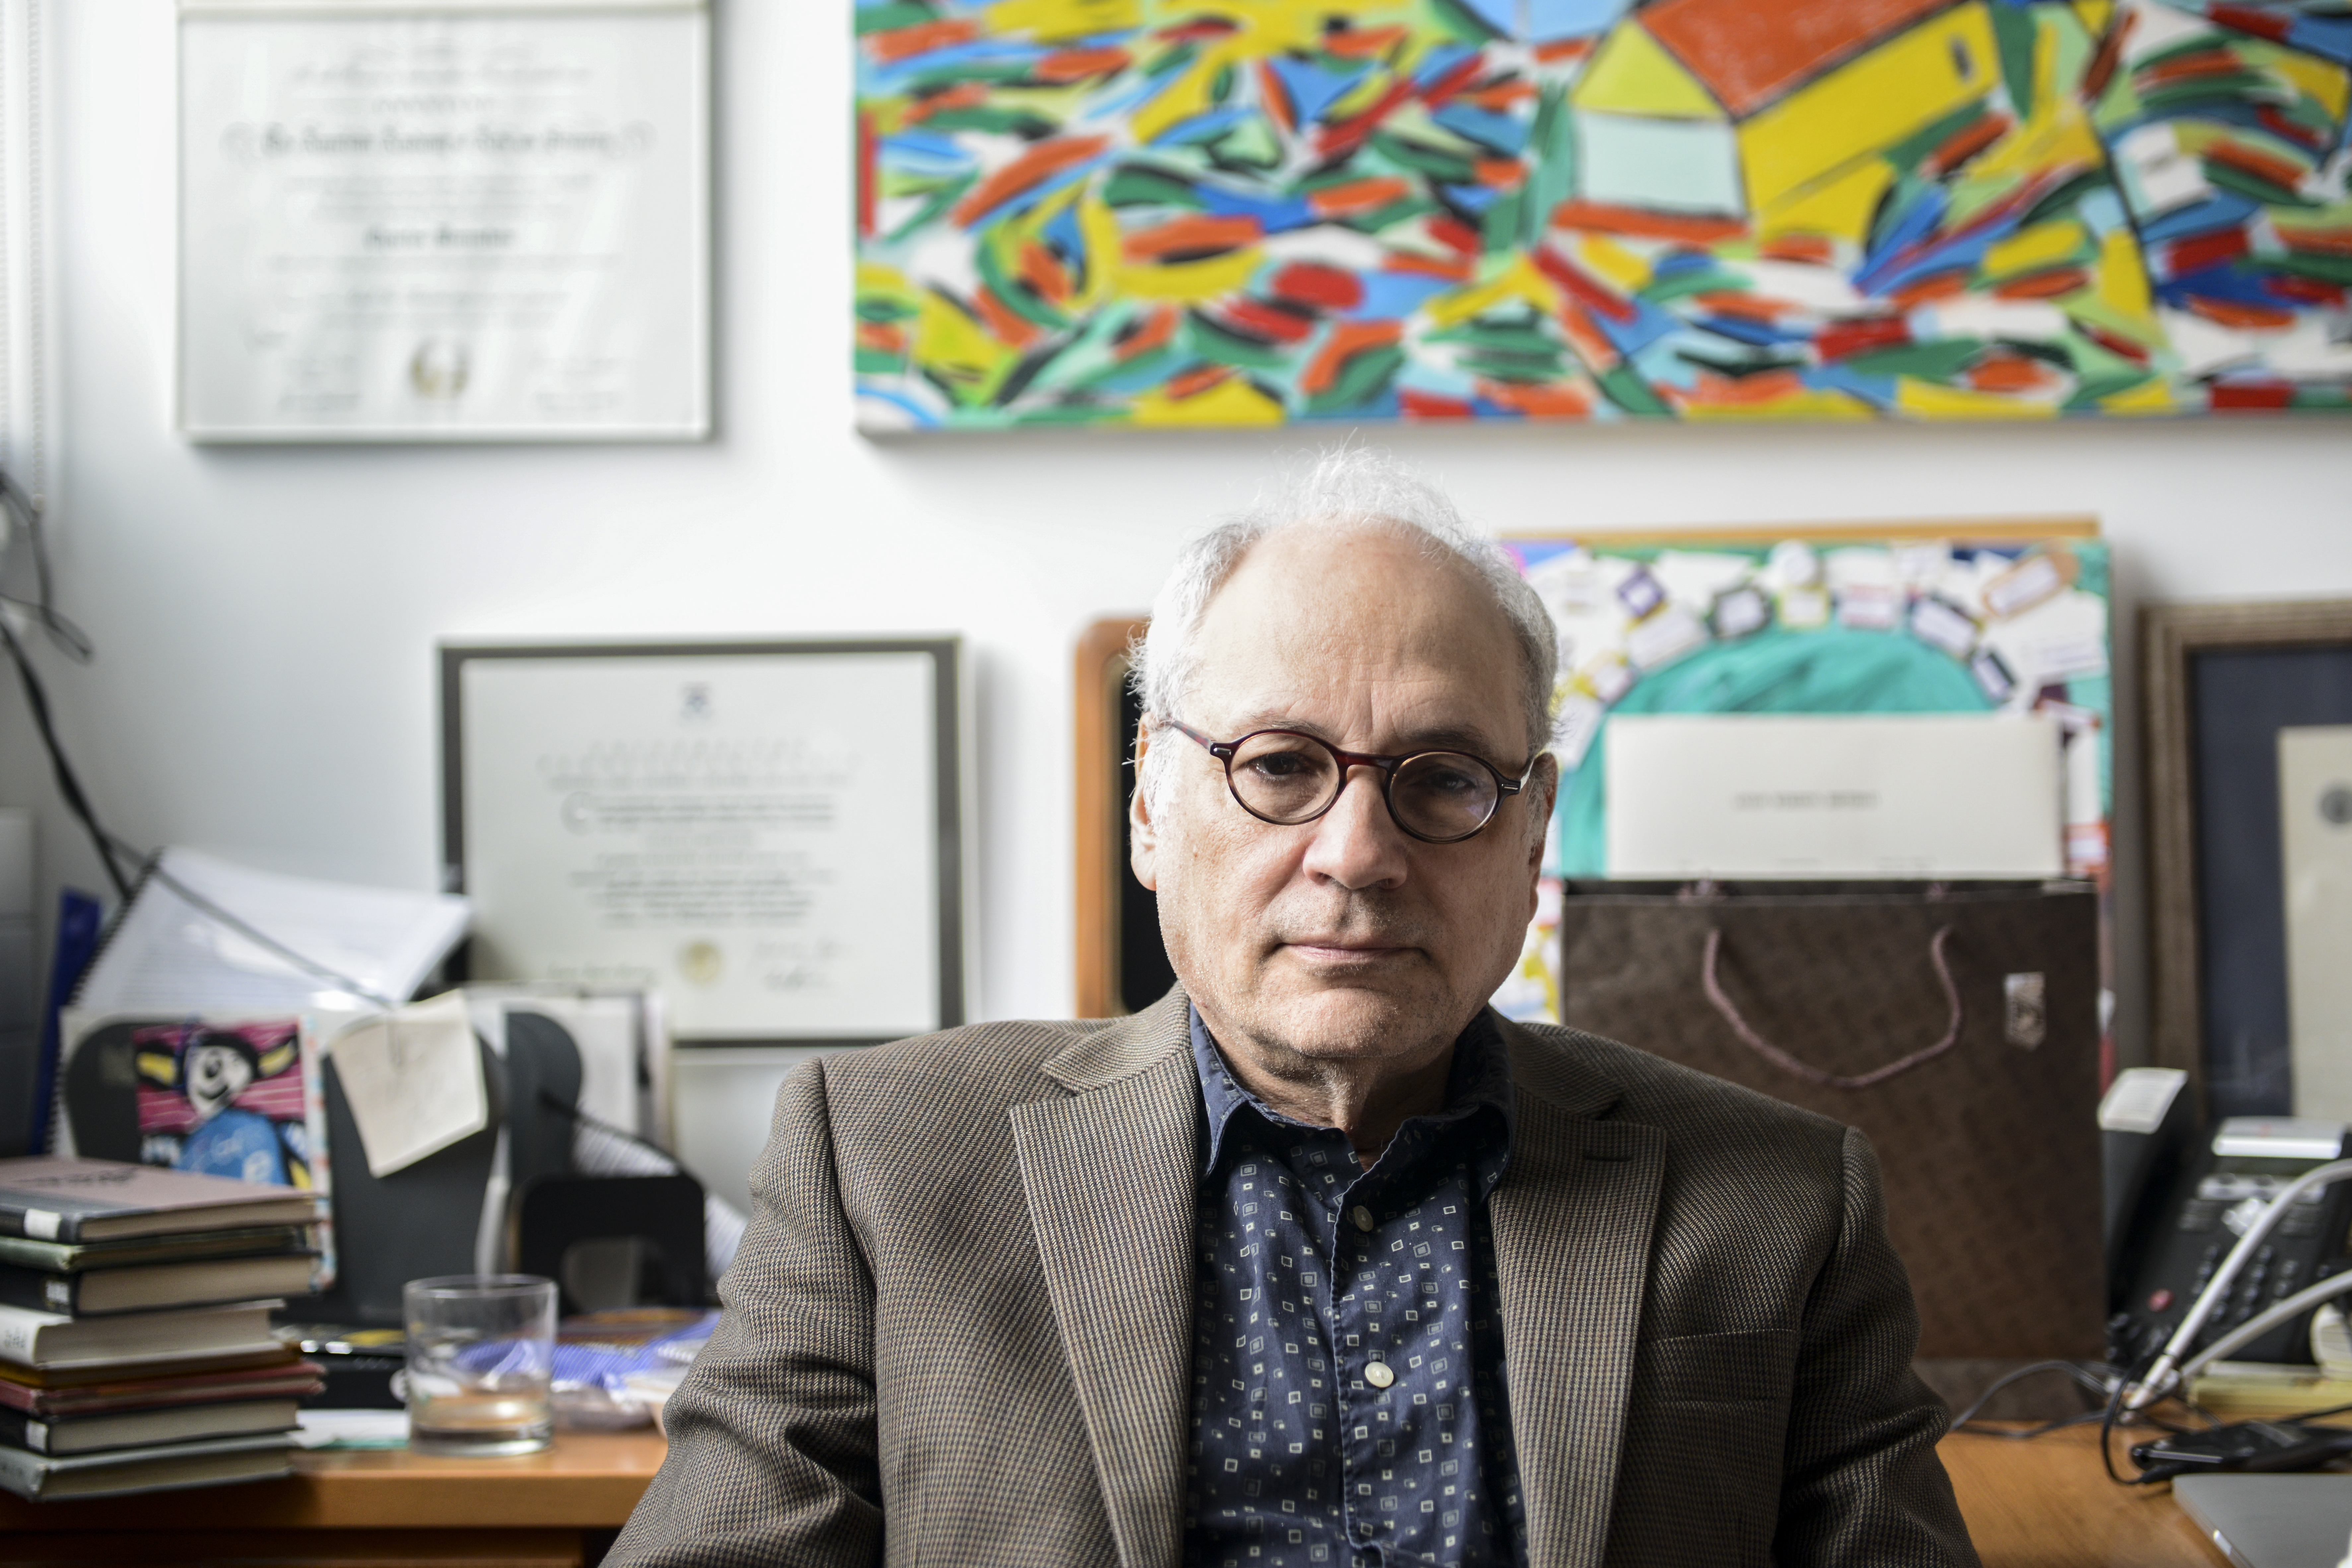 Charles Bernstein at his desk in his office with a colorful painting by his wife on the wall behind him